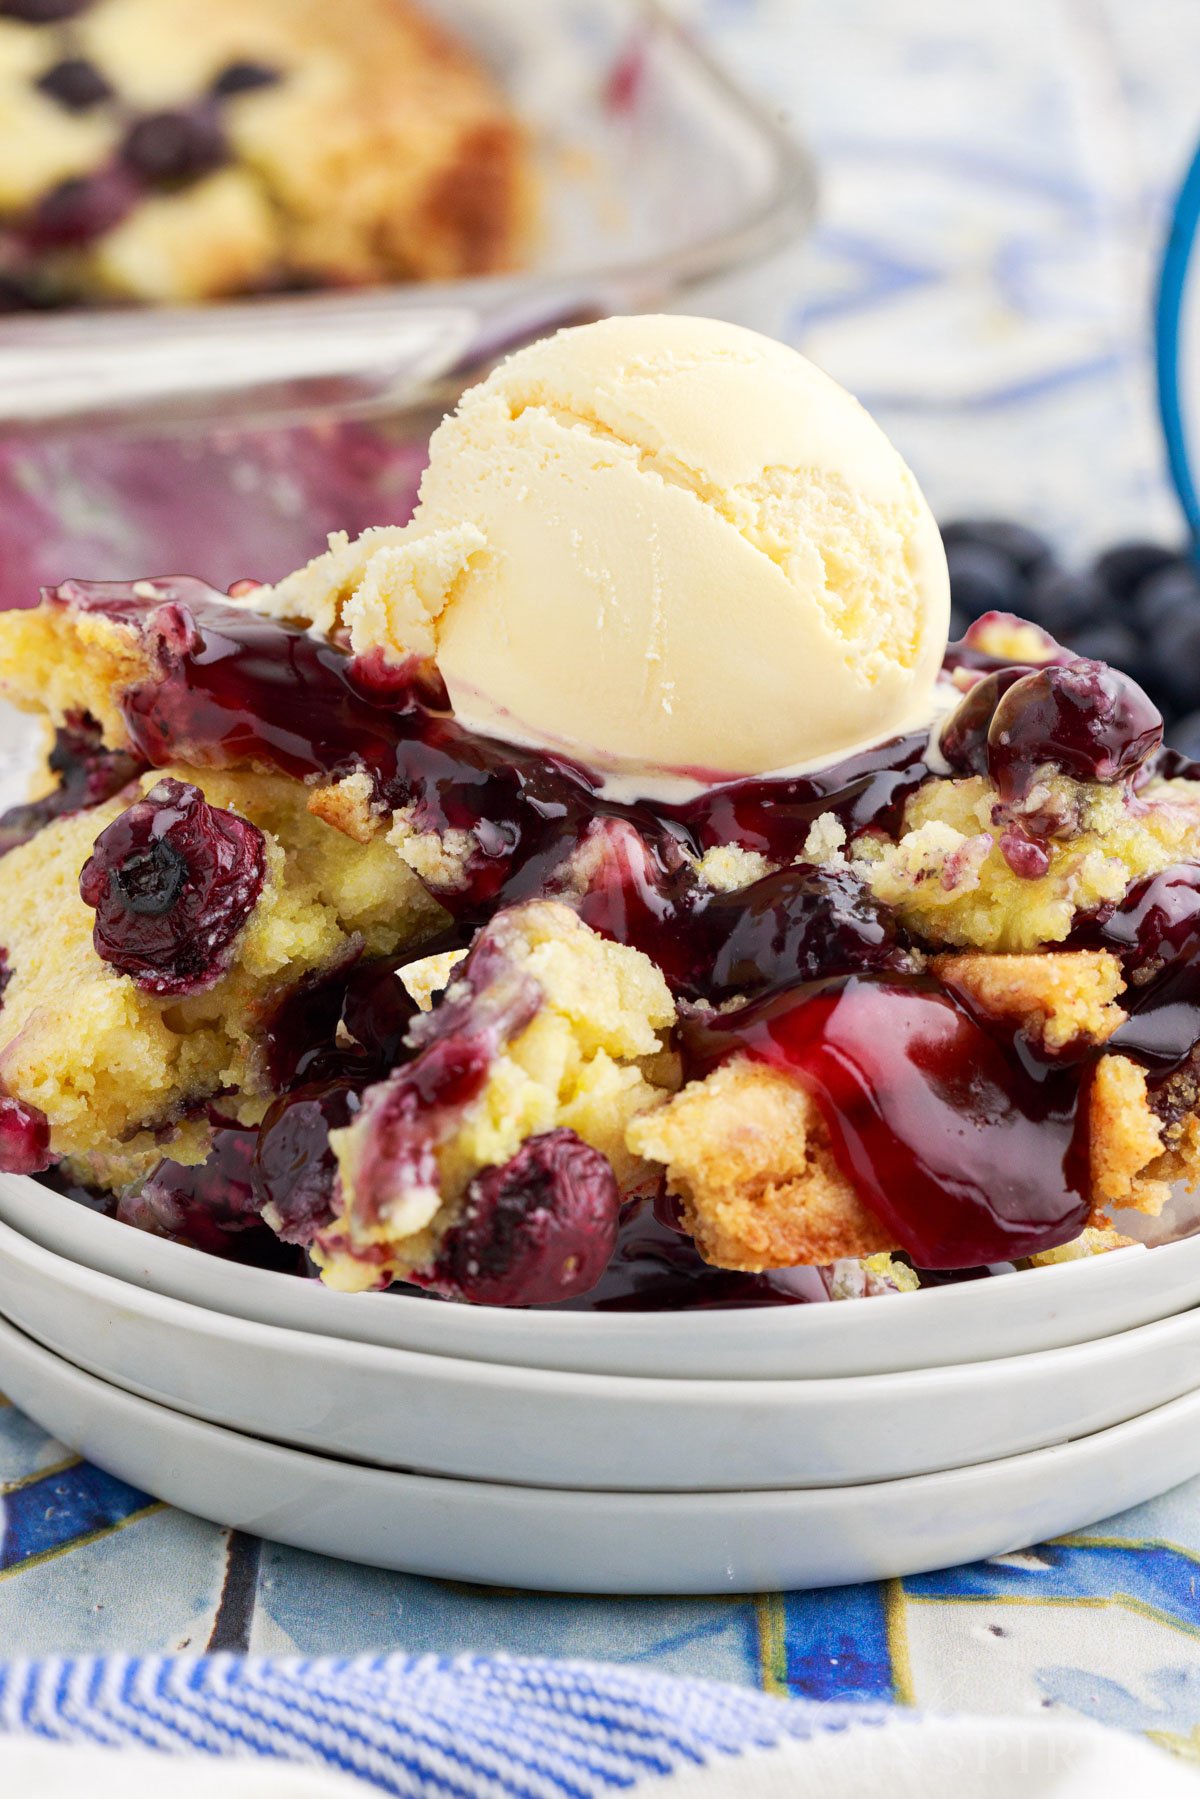 A scoop of ice cream on a serving of Blueberry Dump Cake on a dish.